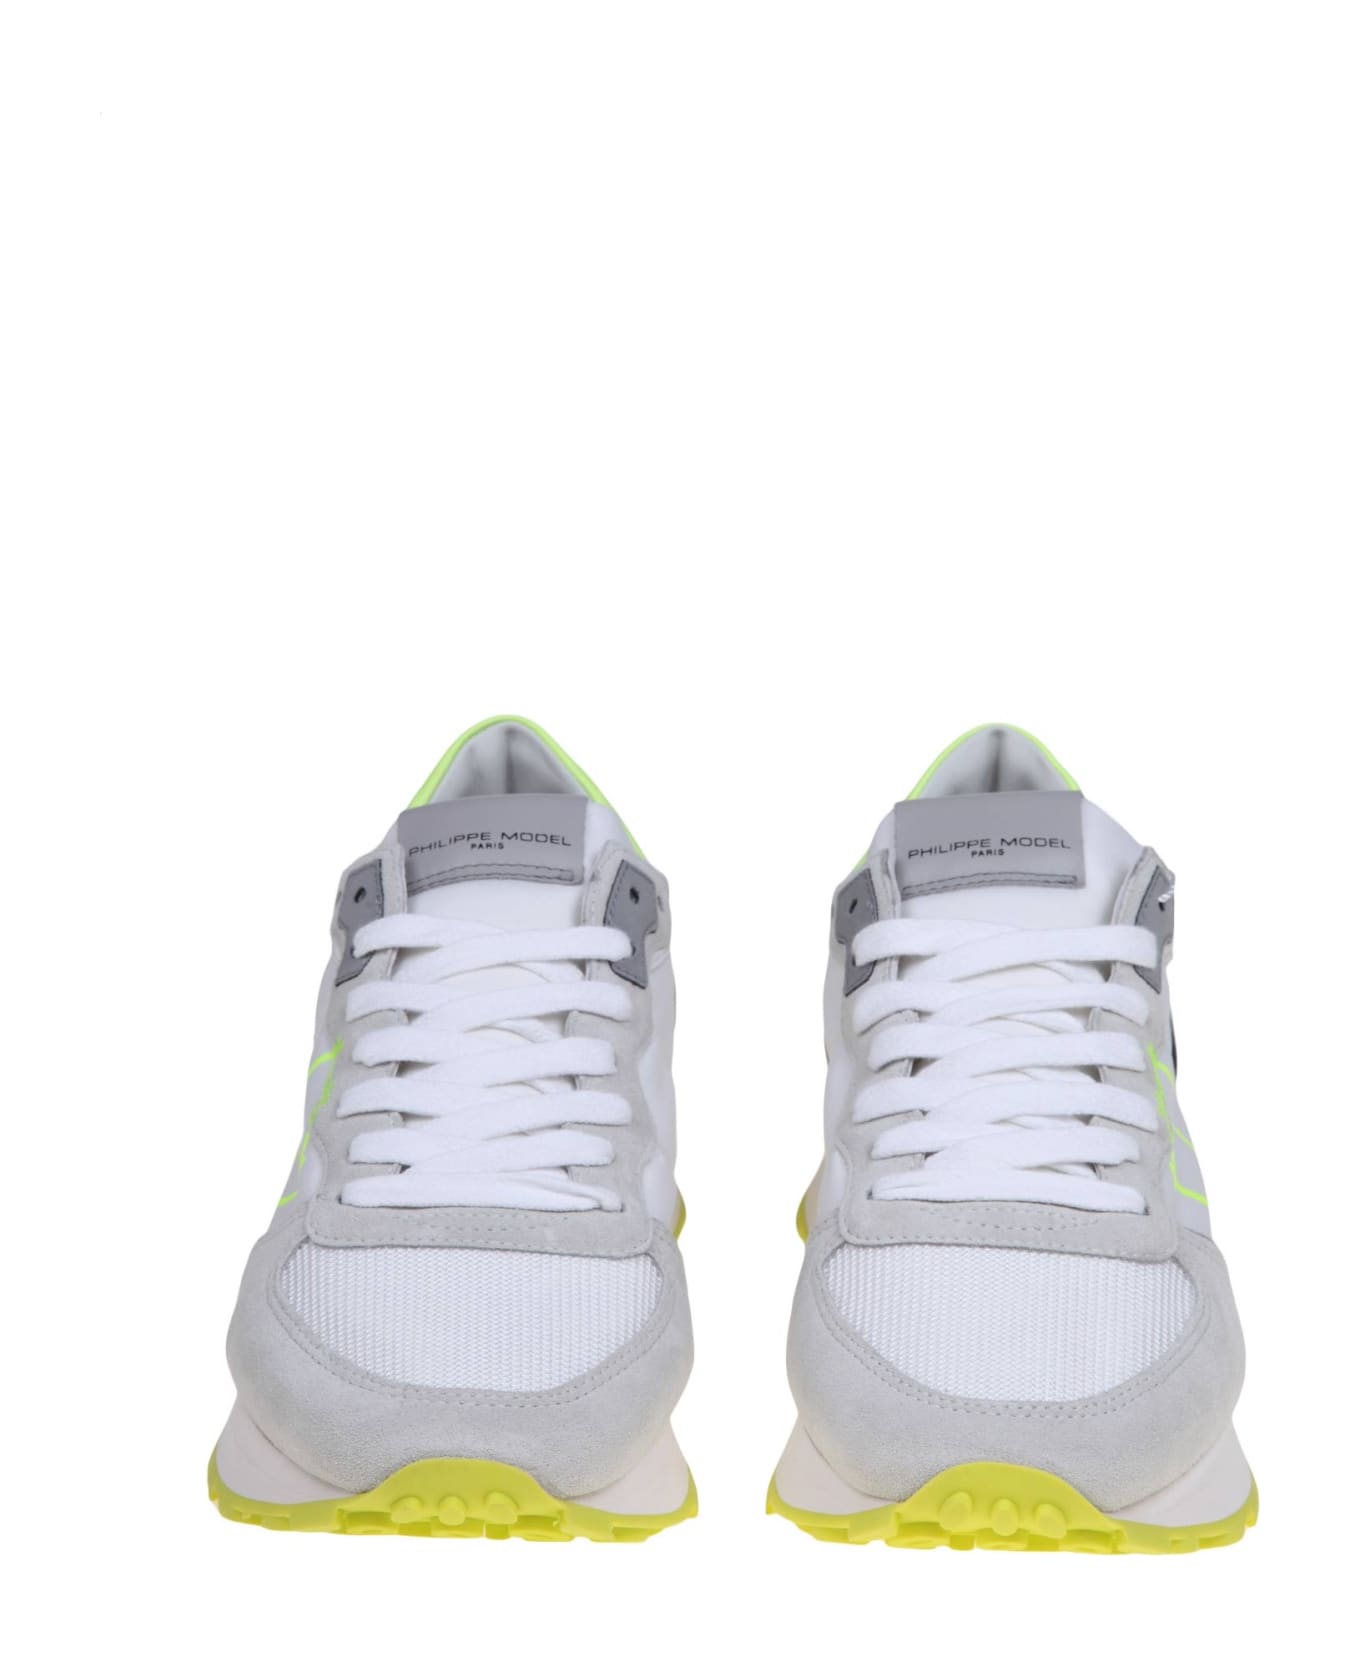 Philippe Model Tropez Haute Low Sneakers In Suede And Nylon Color White And Yellow - Blanc/Jaune スニーカー